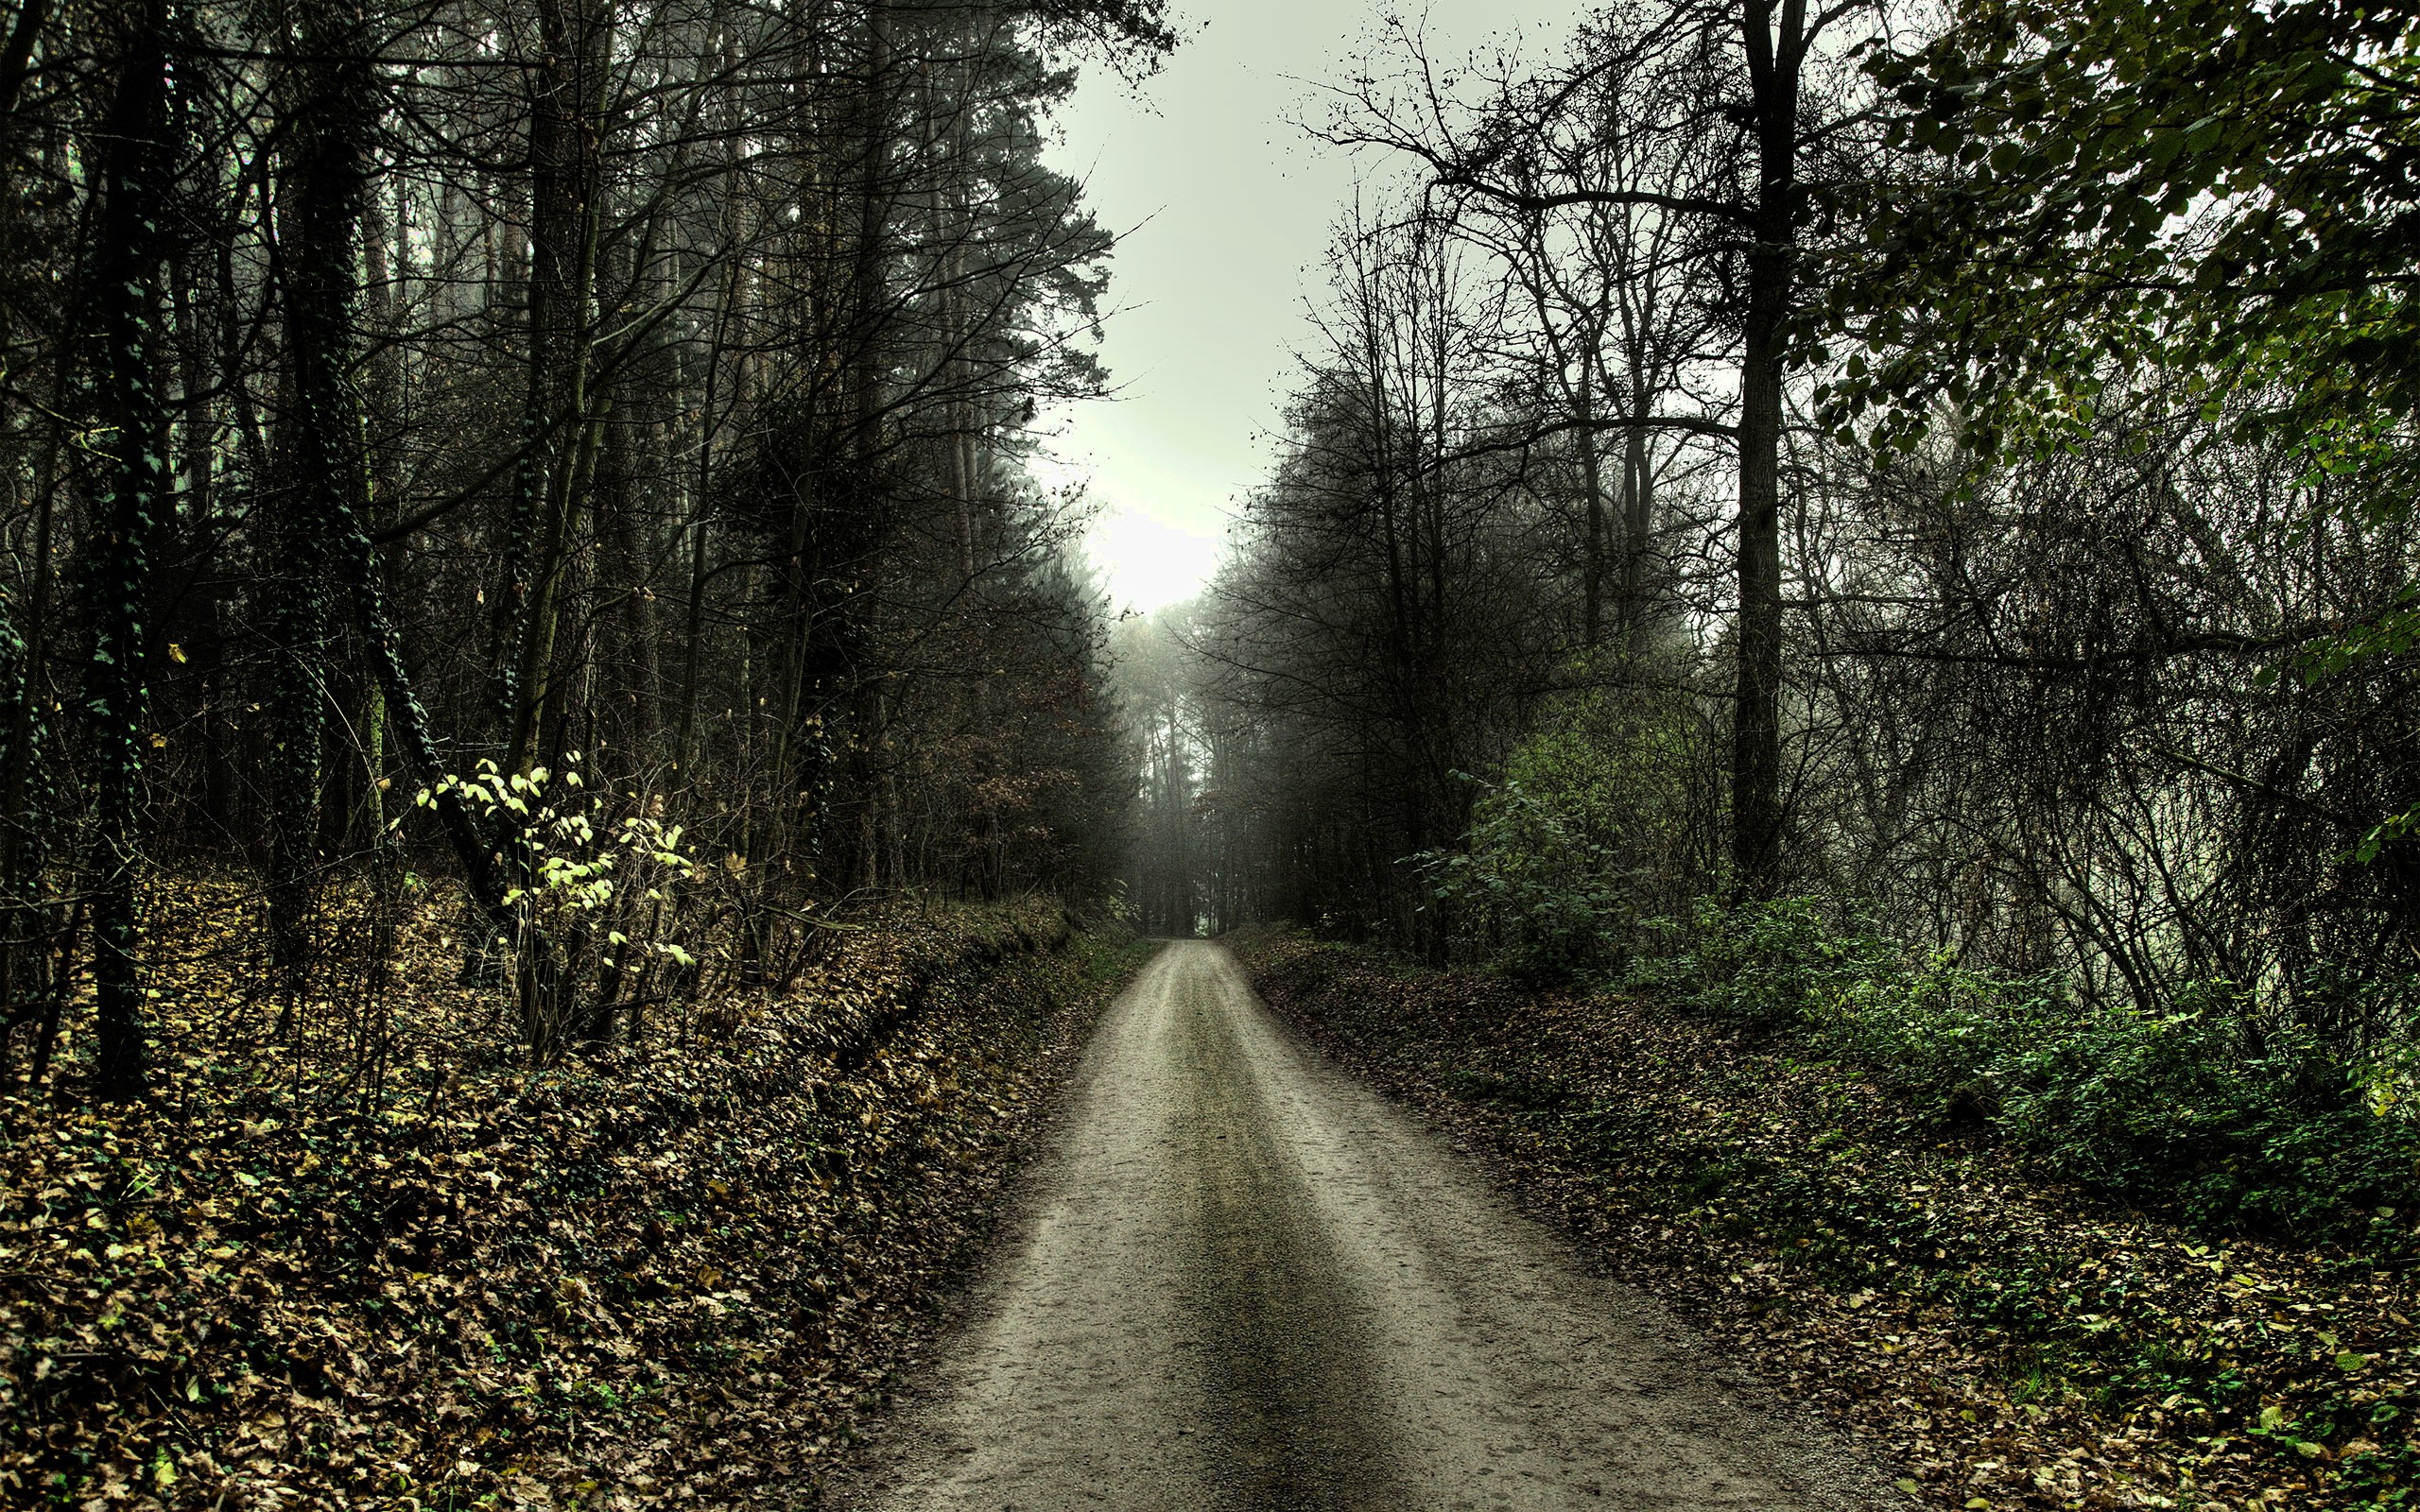 General 2560x1600 nature HDR trees forest path dirt road grass mist plants